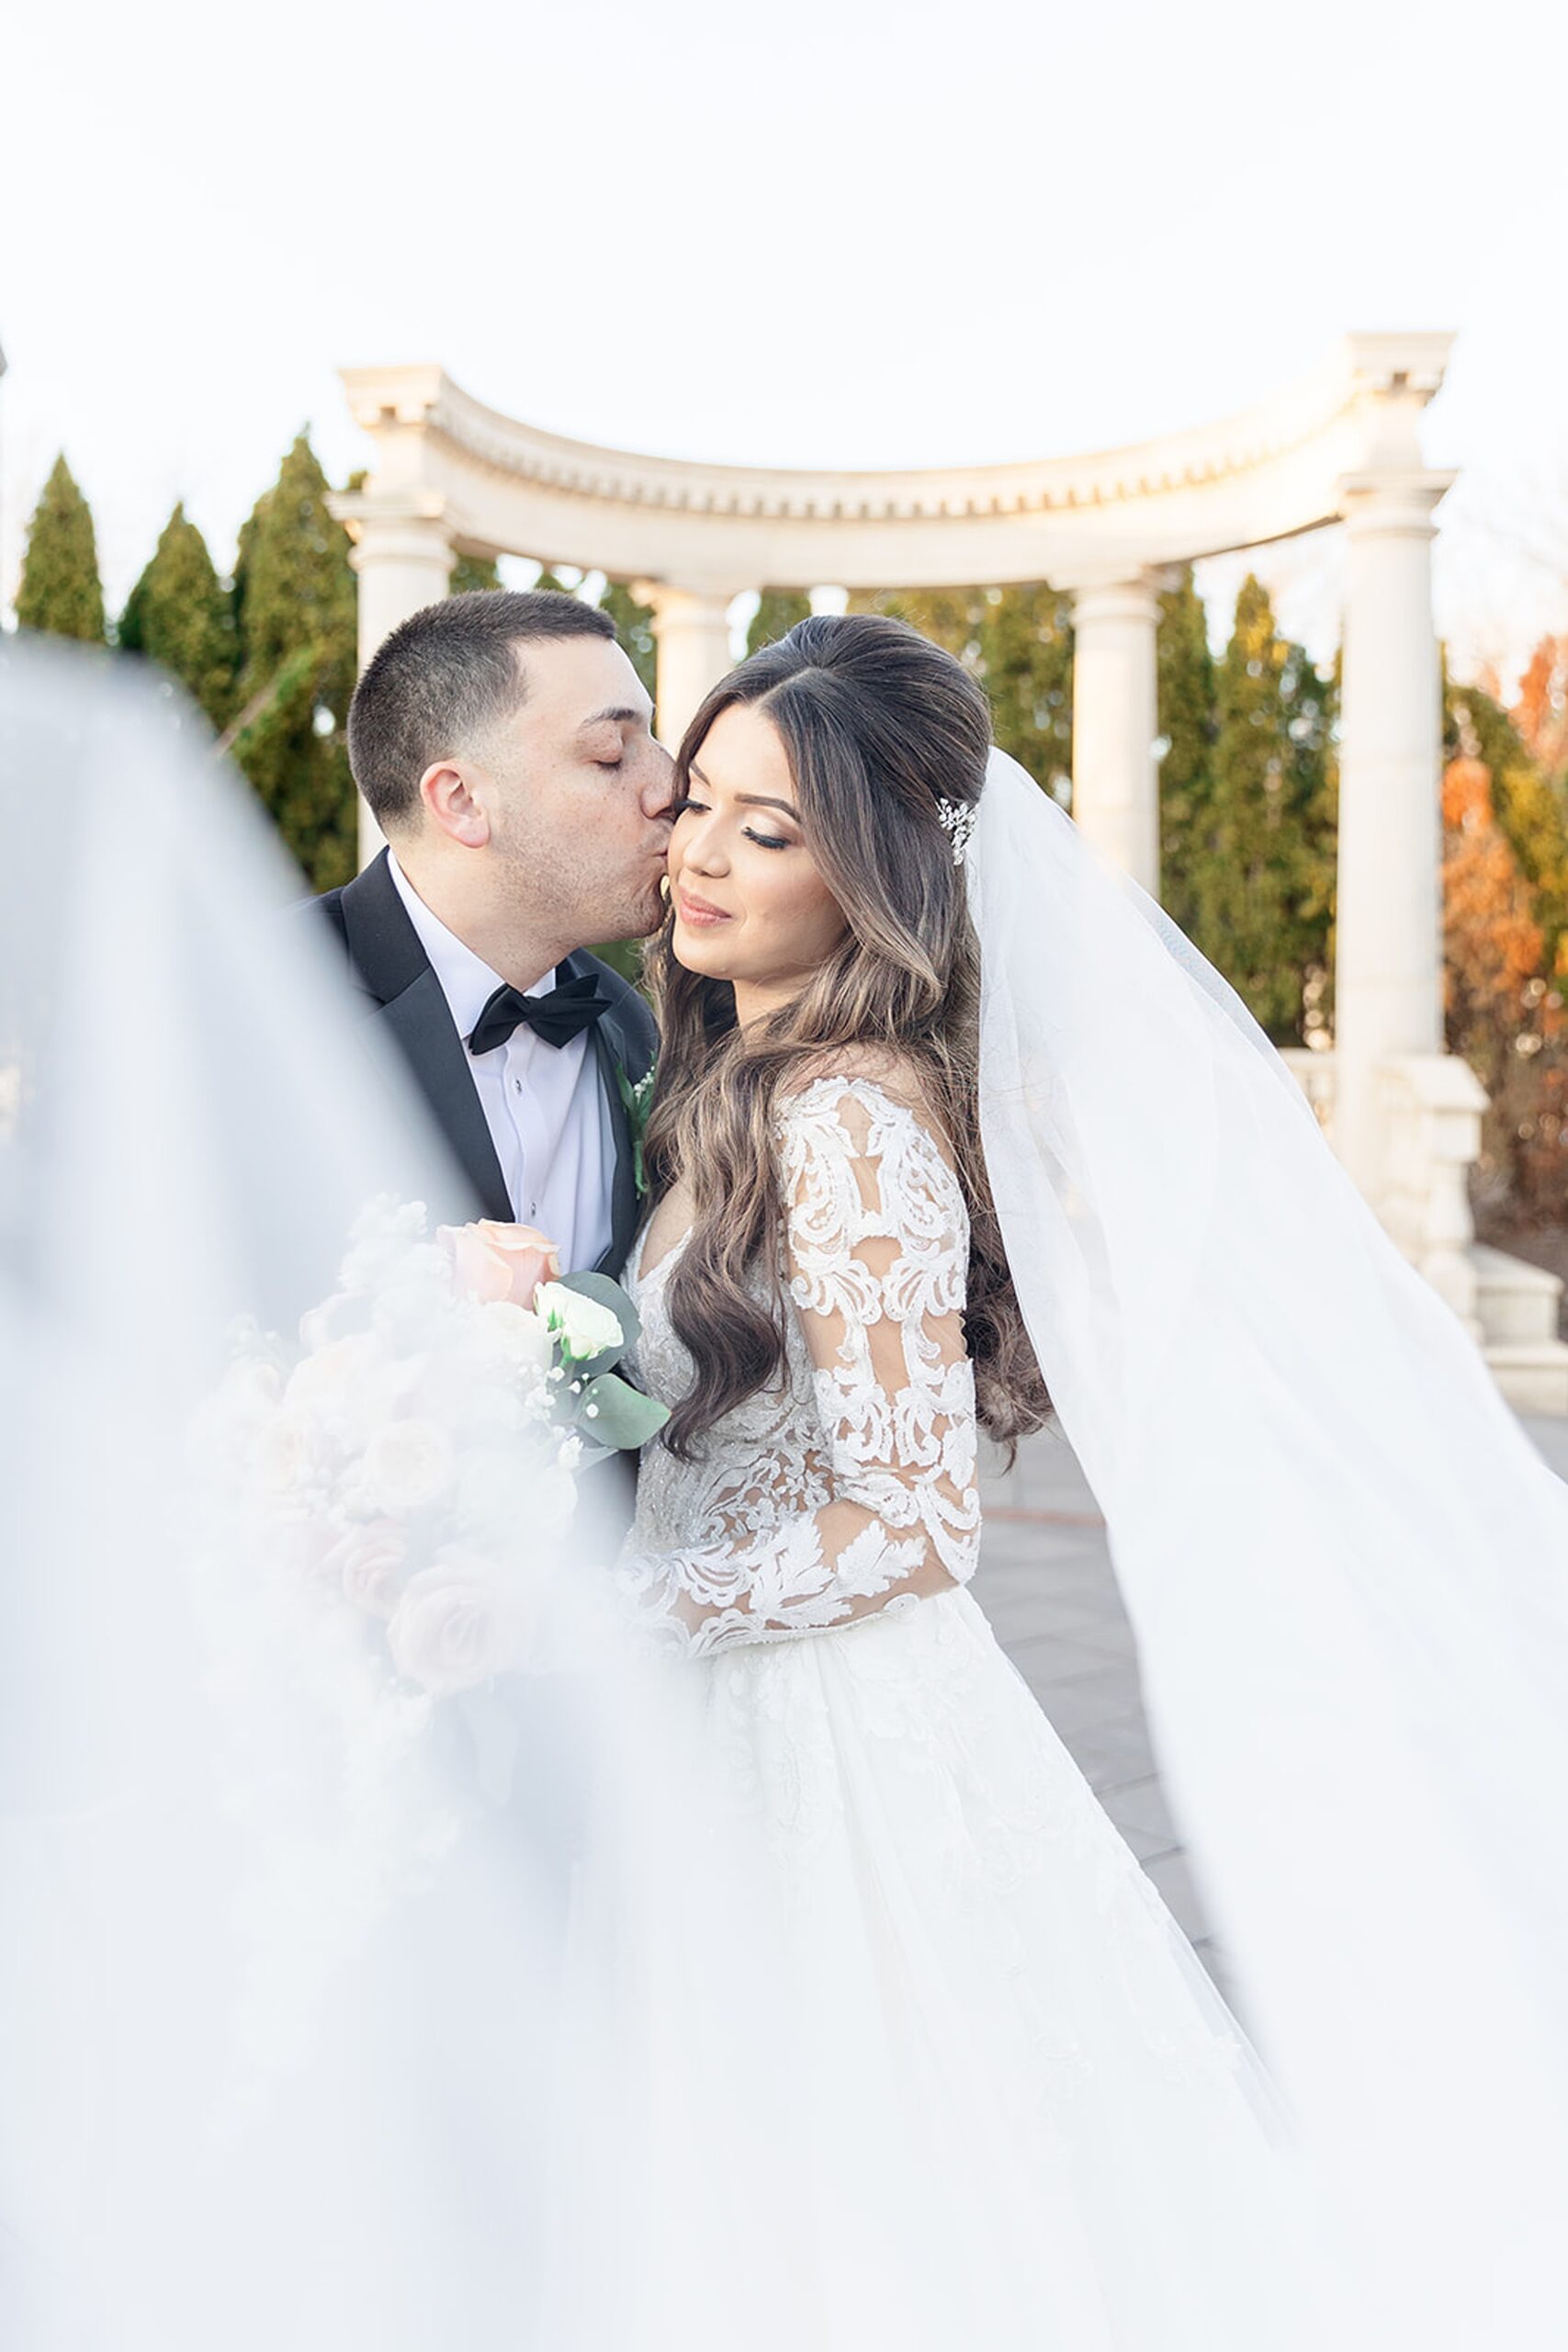 A groom in a black tuxedo kisses his bride in a white lace dress while the veil blows in the wind in a garden patio